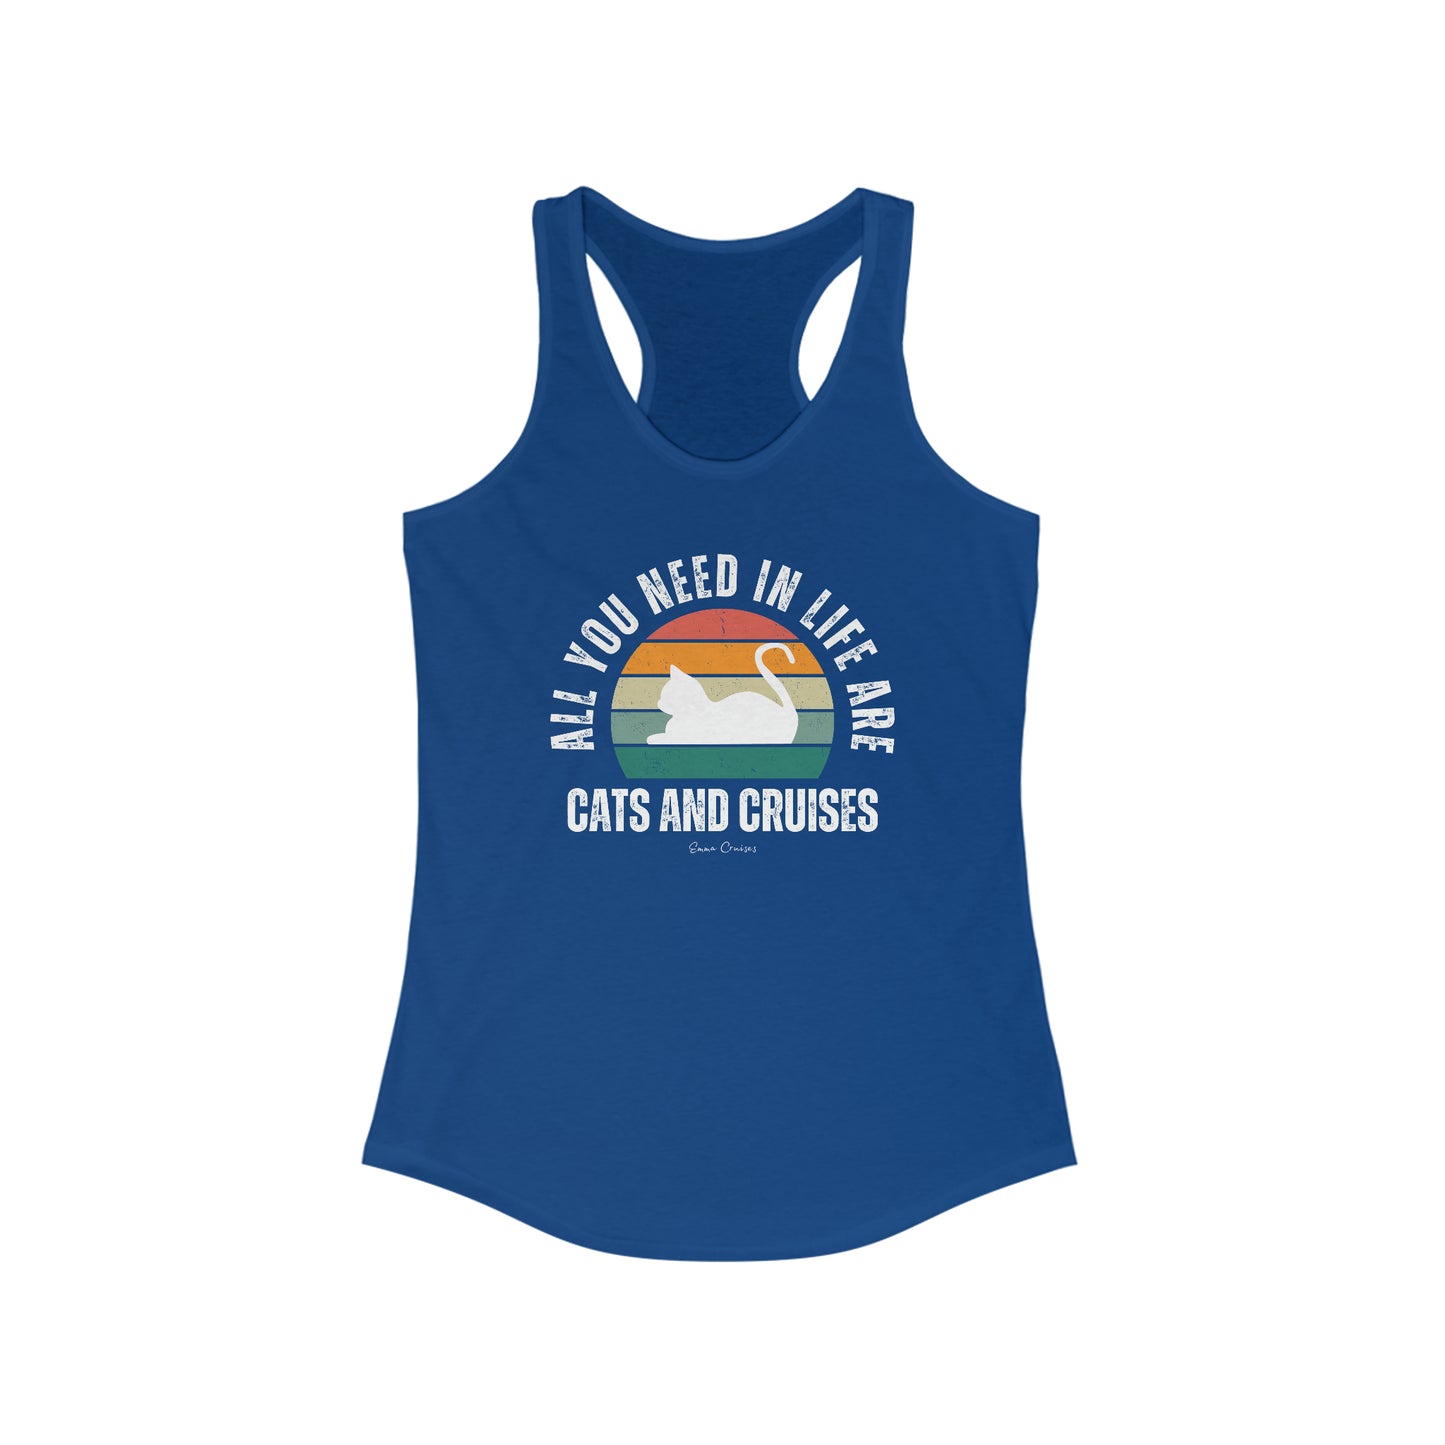 Cats and Cruises - Tank Top